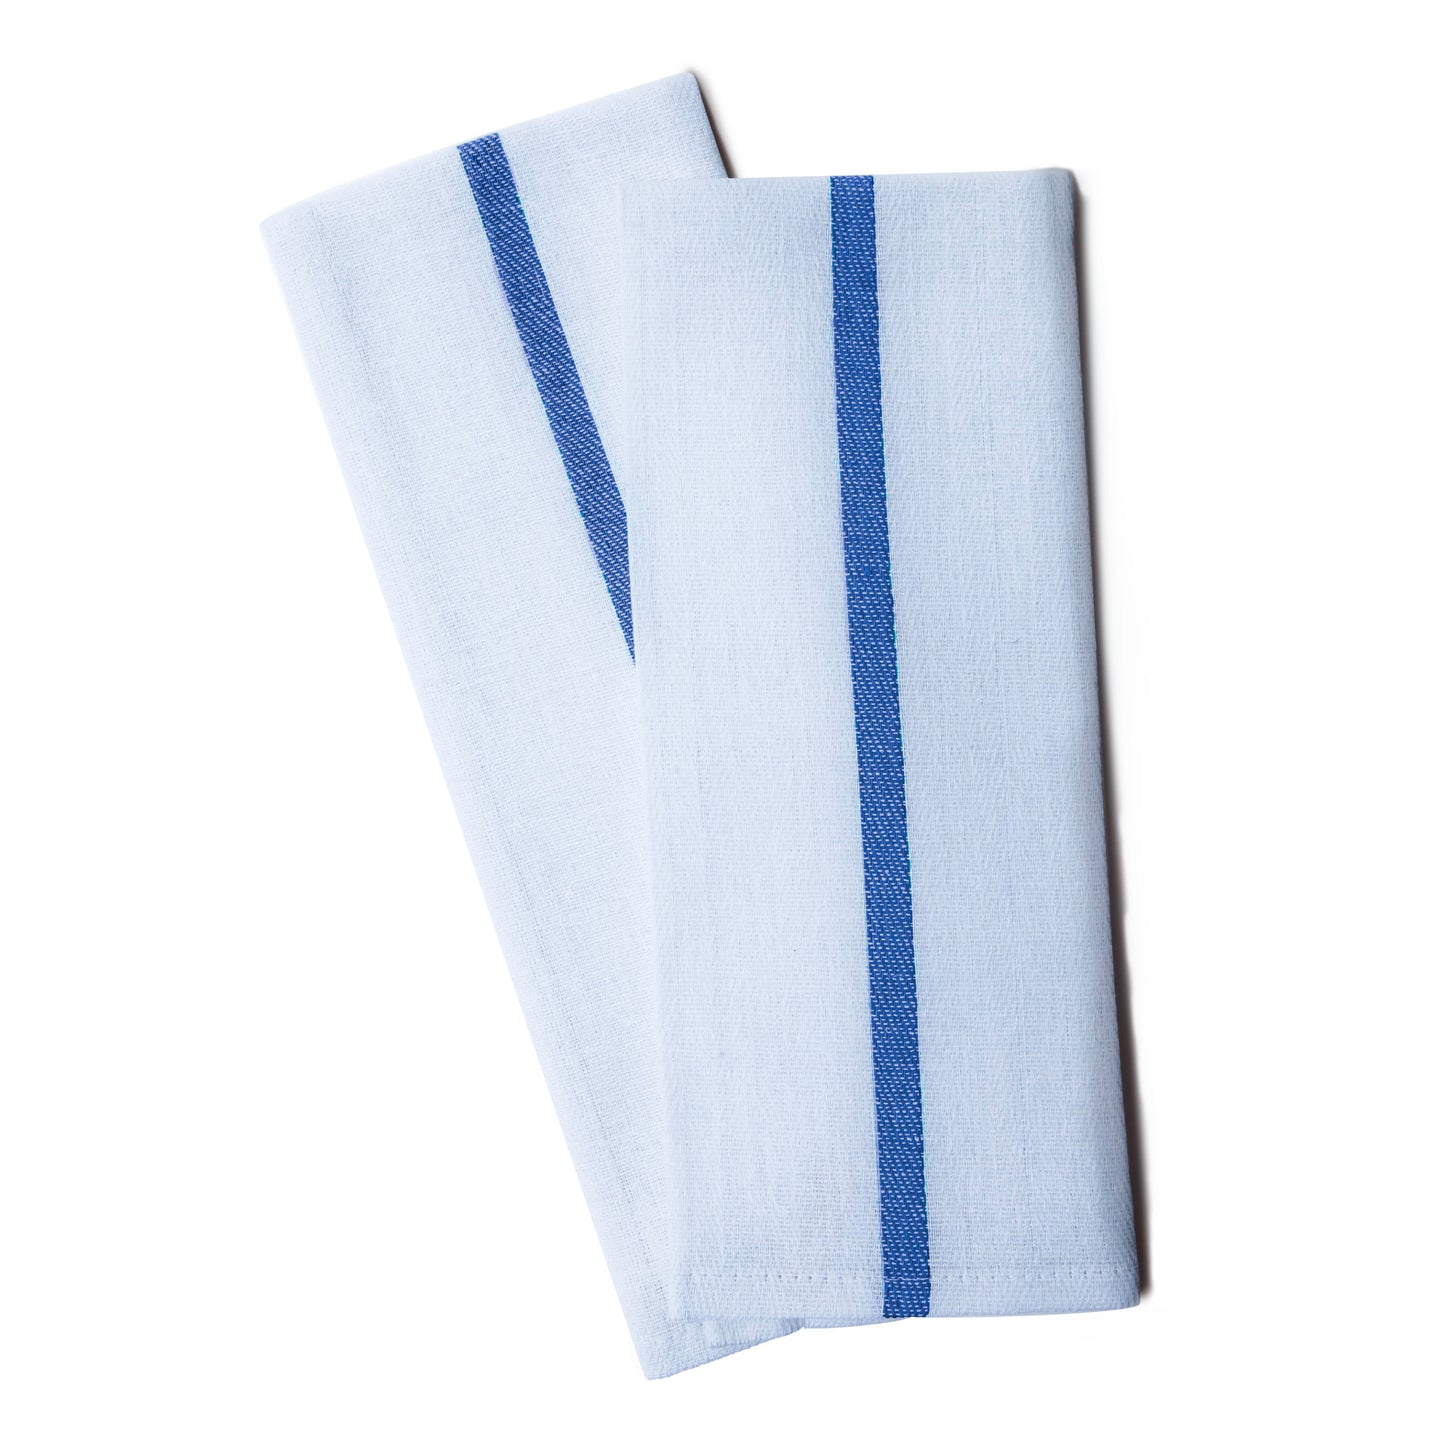 Barber Towel, 15x26 inch, White with Blue Center Stripe